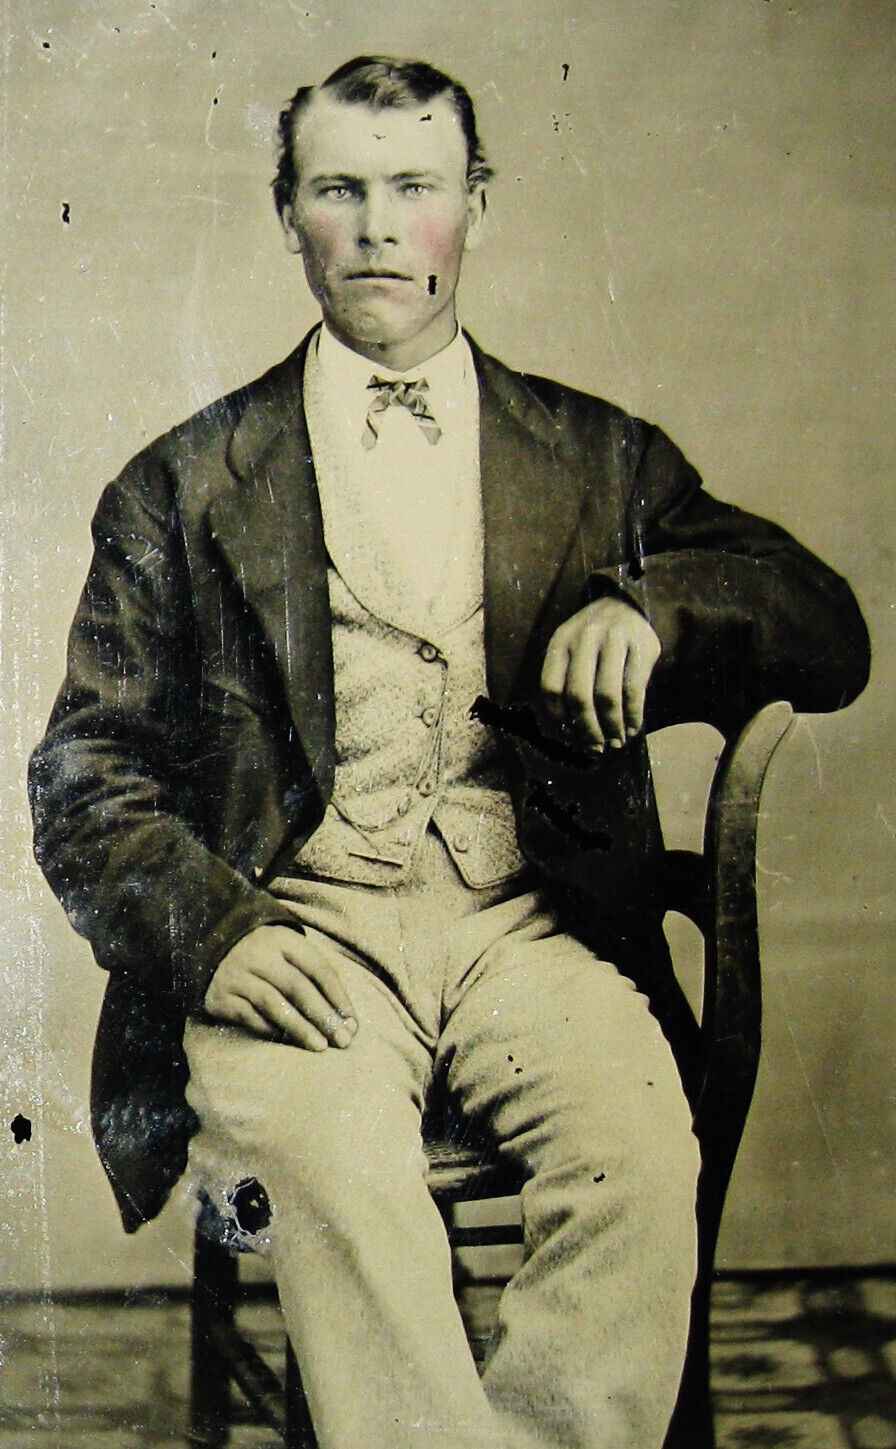 TINTYPE PHOTO OF A HANDSOME DAPPER SEATED YOUNG MAN